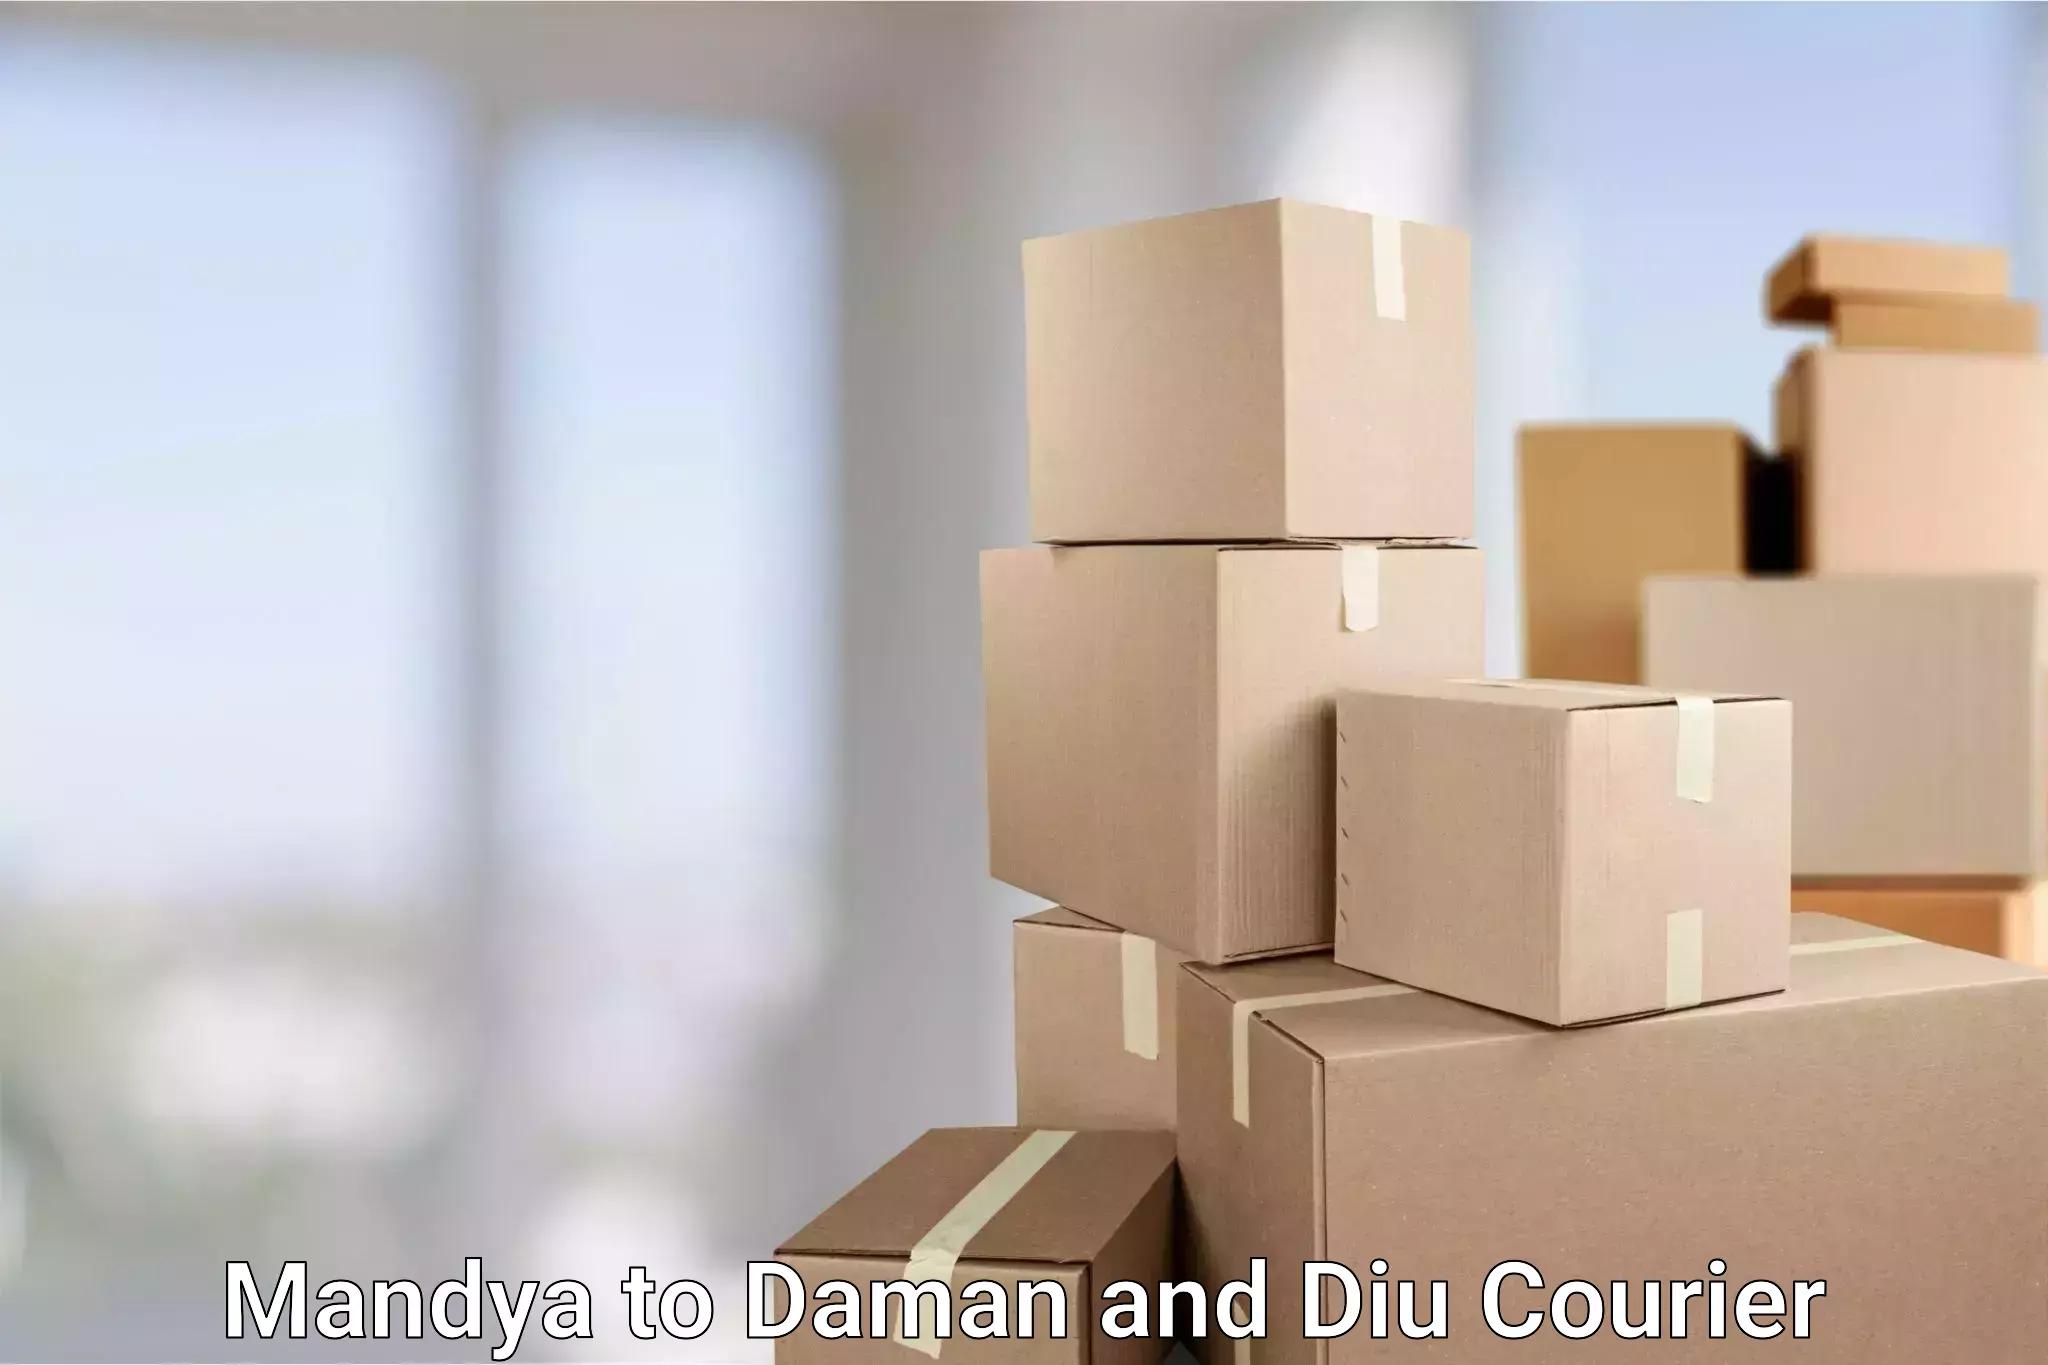 Package delivery network Mandya to Daman and Diu